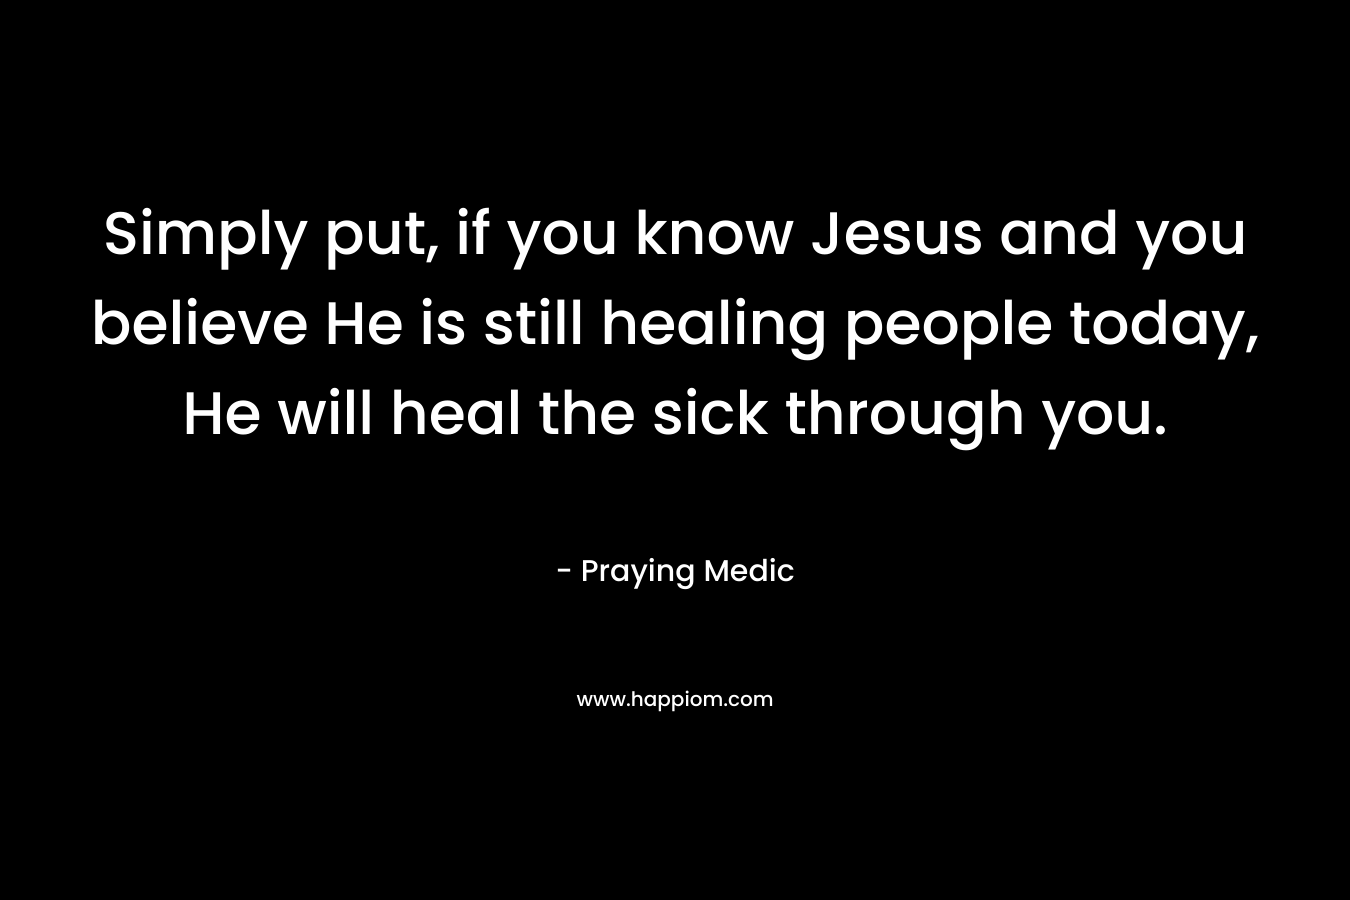 Simply put, if you know Jesus and you believe He is still healing people today, He will heal the sick through you.